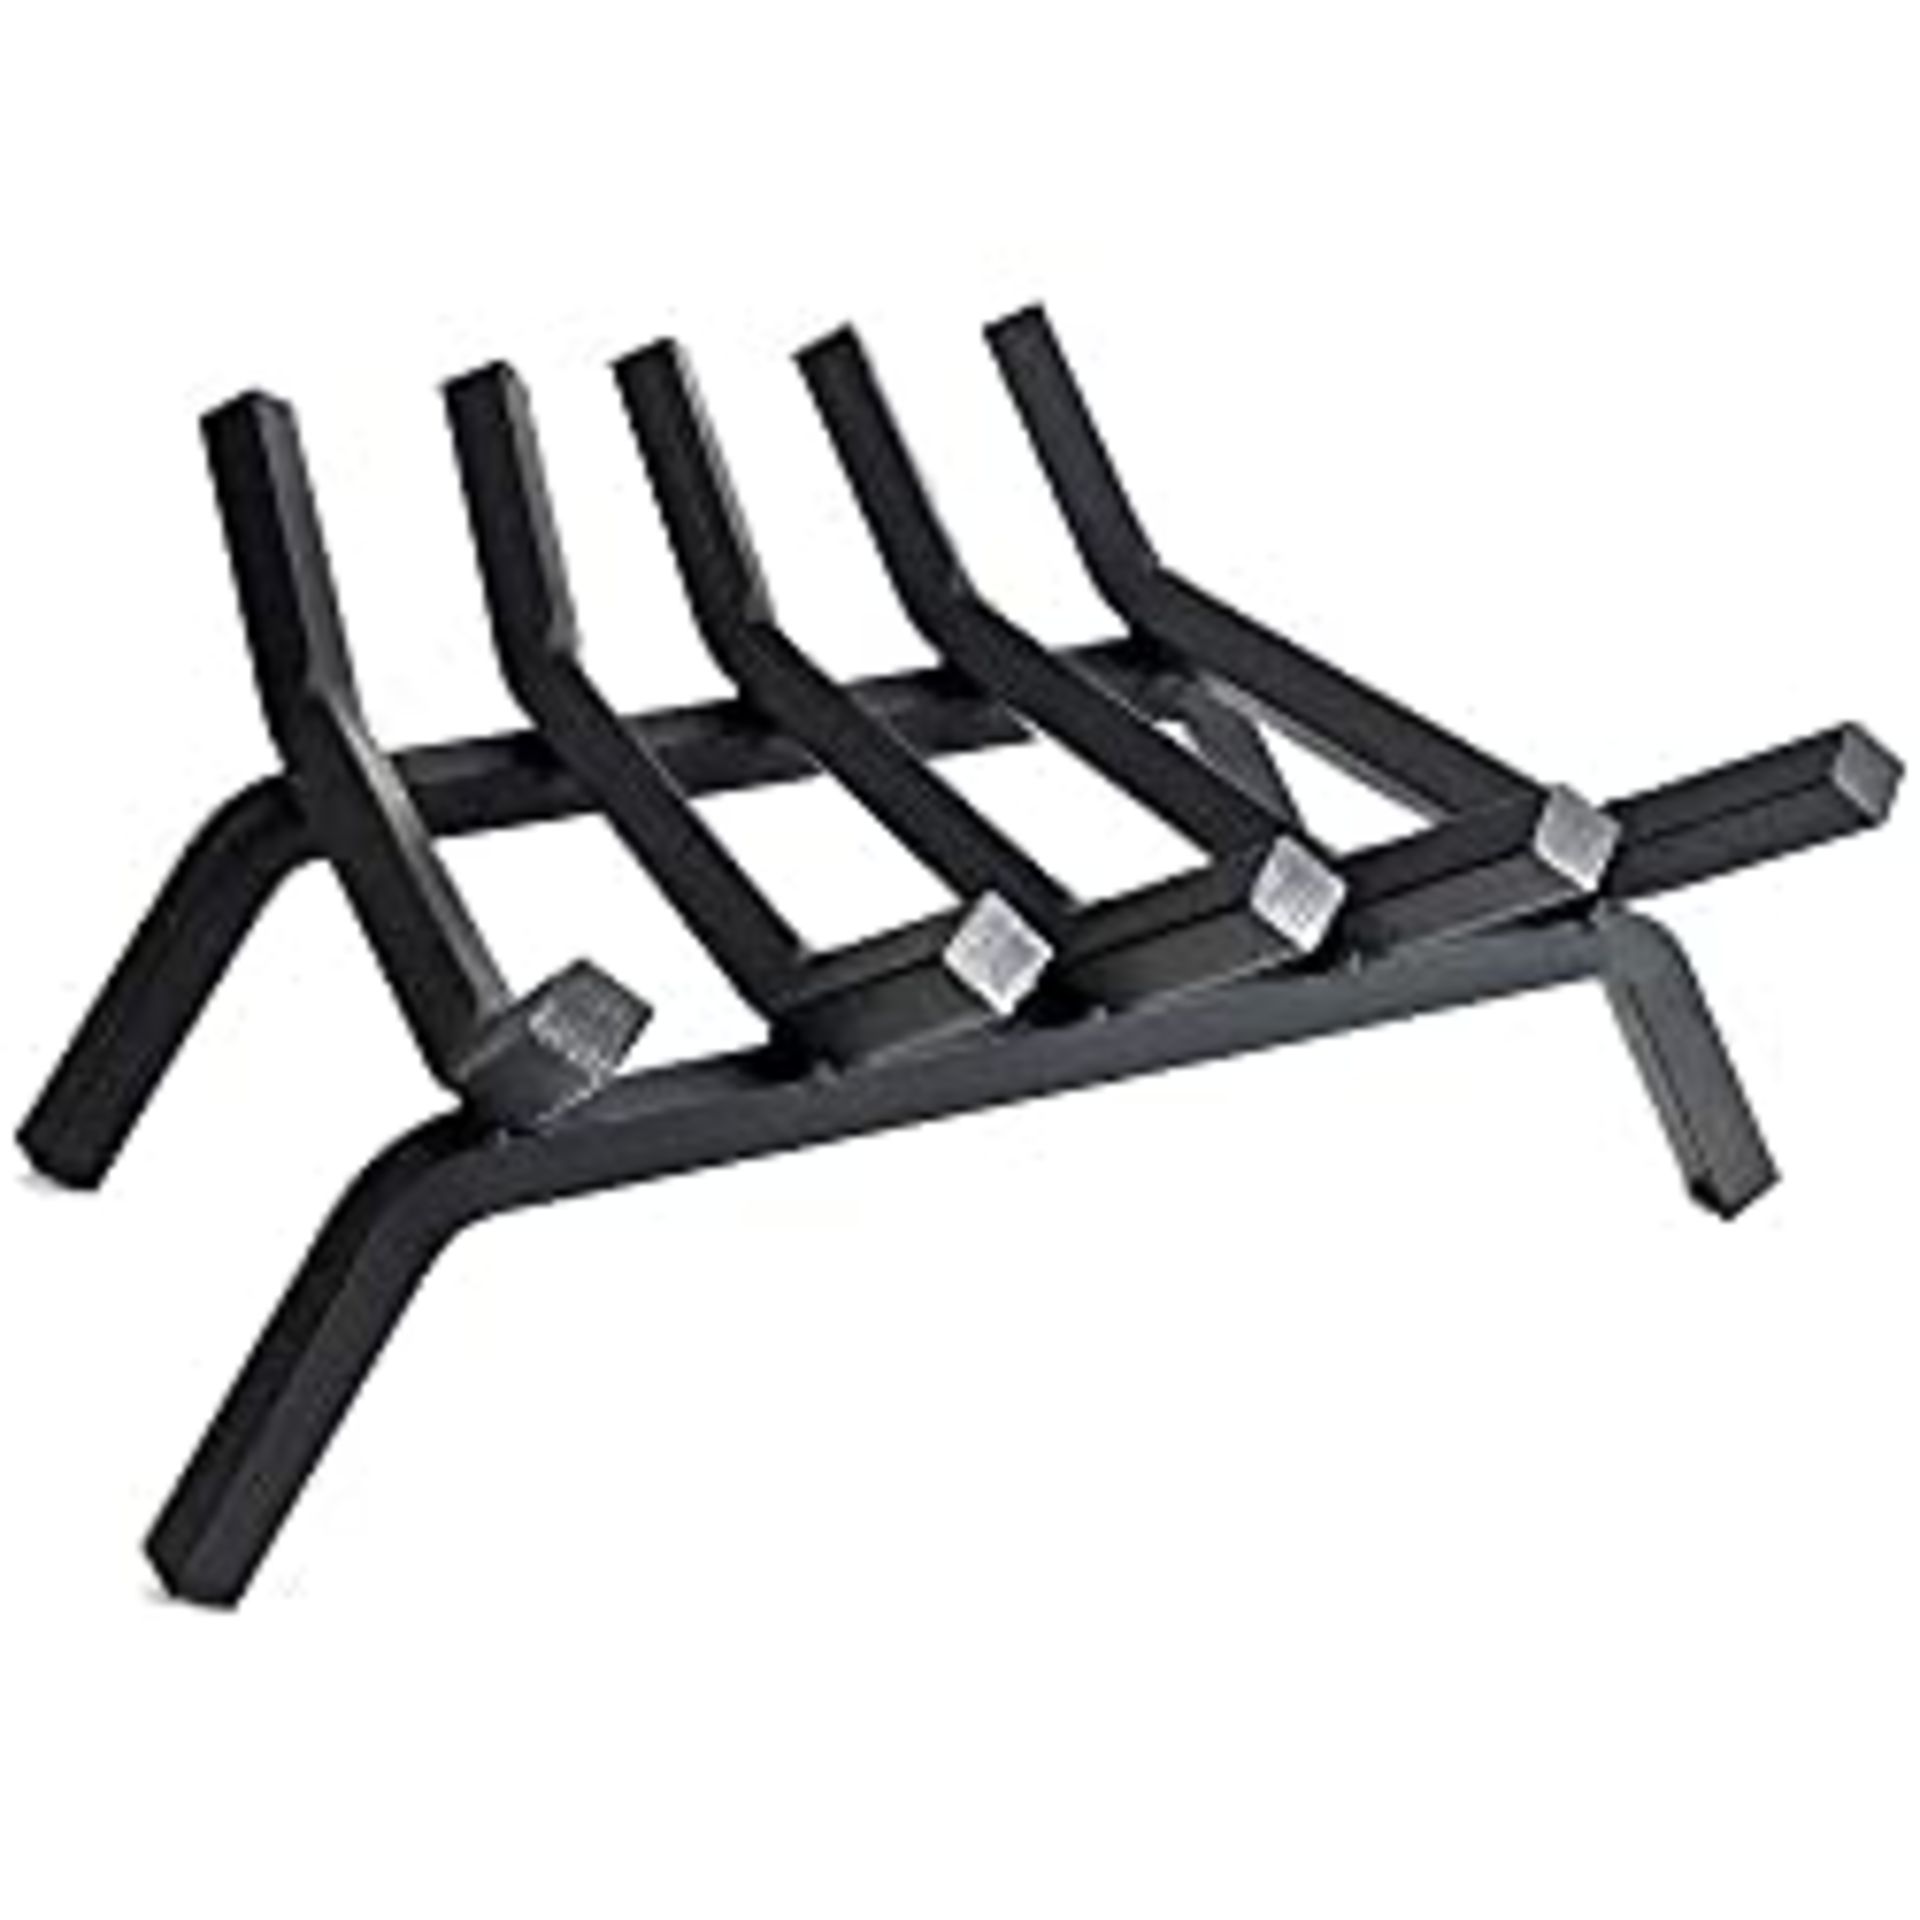 RRP £49.99 InnFinest Fireplace Log Grate 18 inch